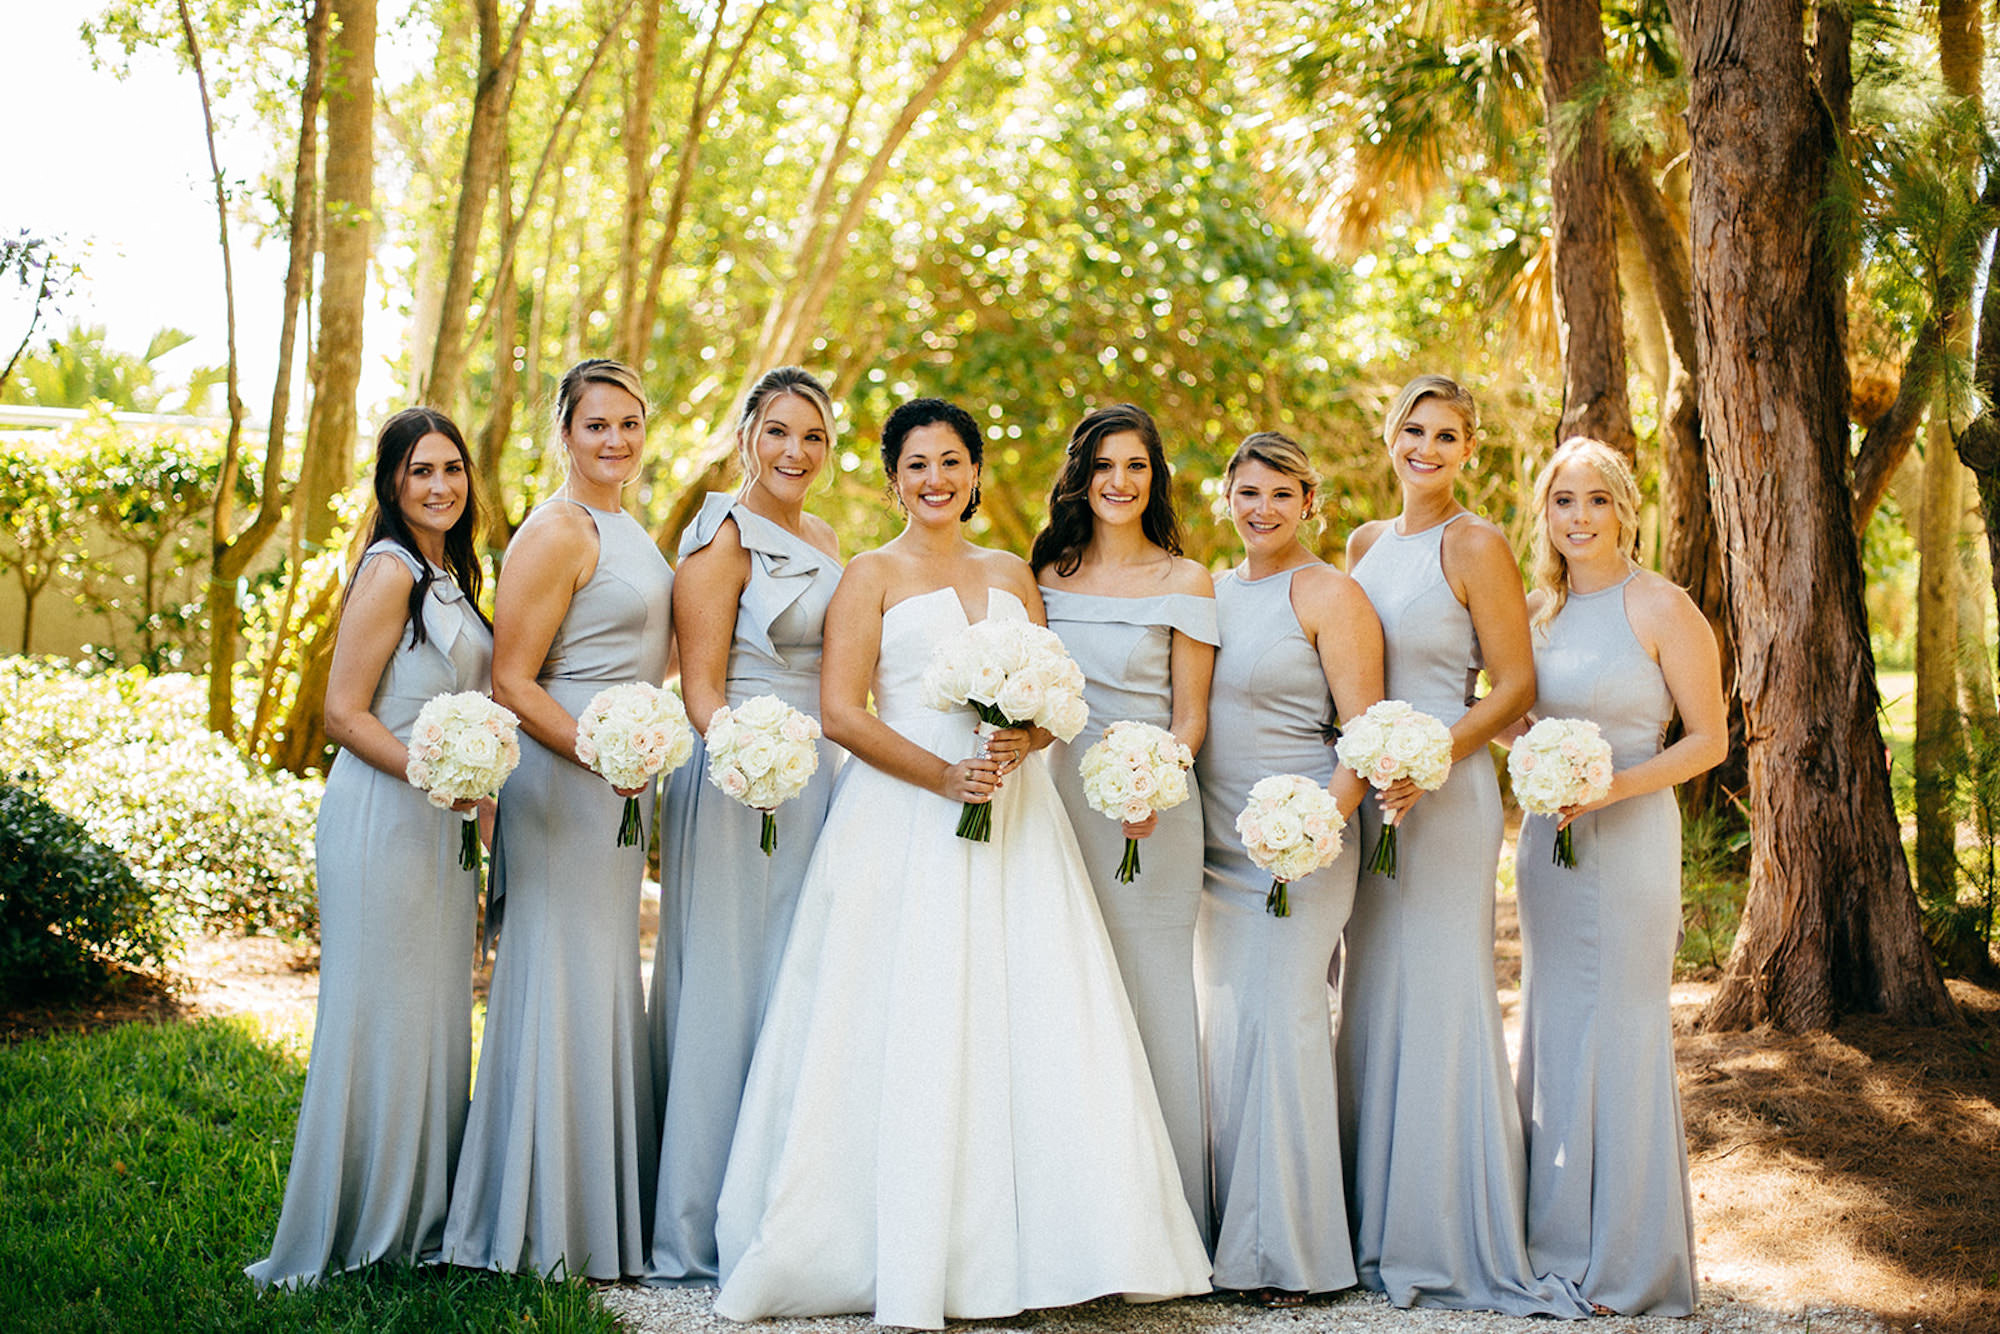 Modern Elegant Bride Wearing Strapless Classic Ballgown Wedding Dress, Bridesmaids in Silver, Gray Mix and Match Dresses Holding Round White Roses Floral Bouquets